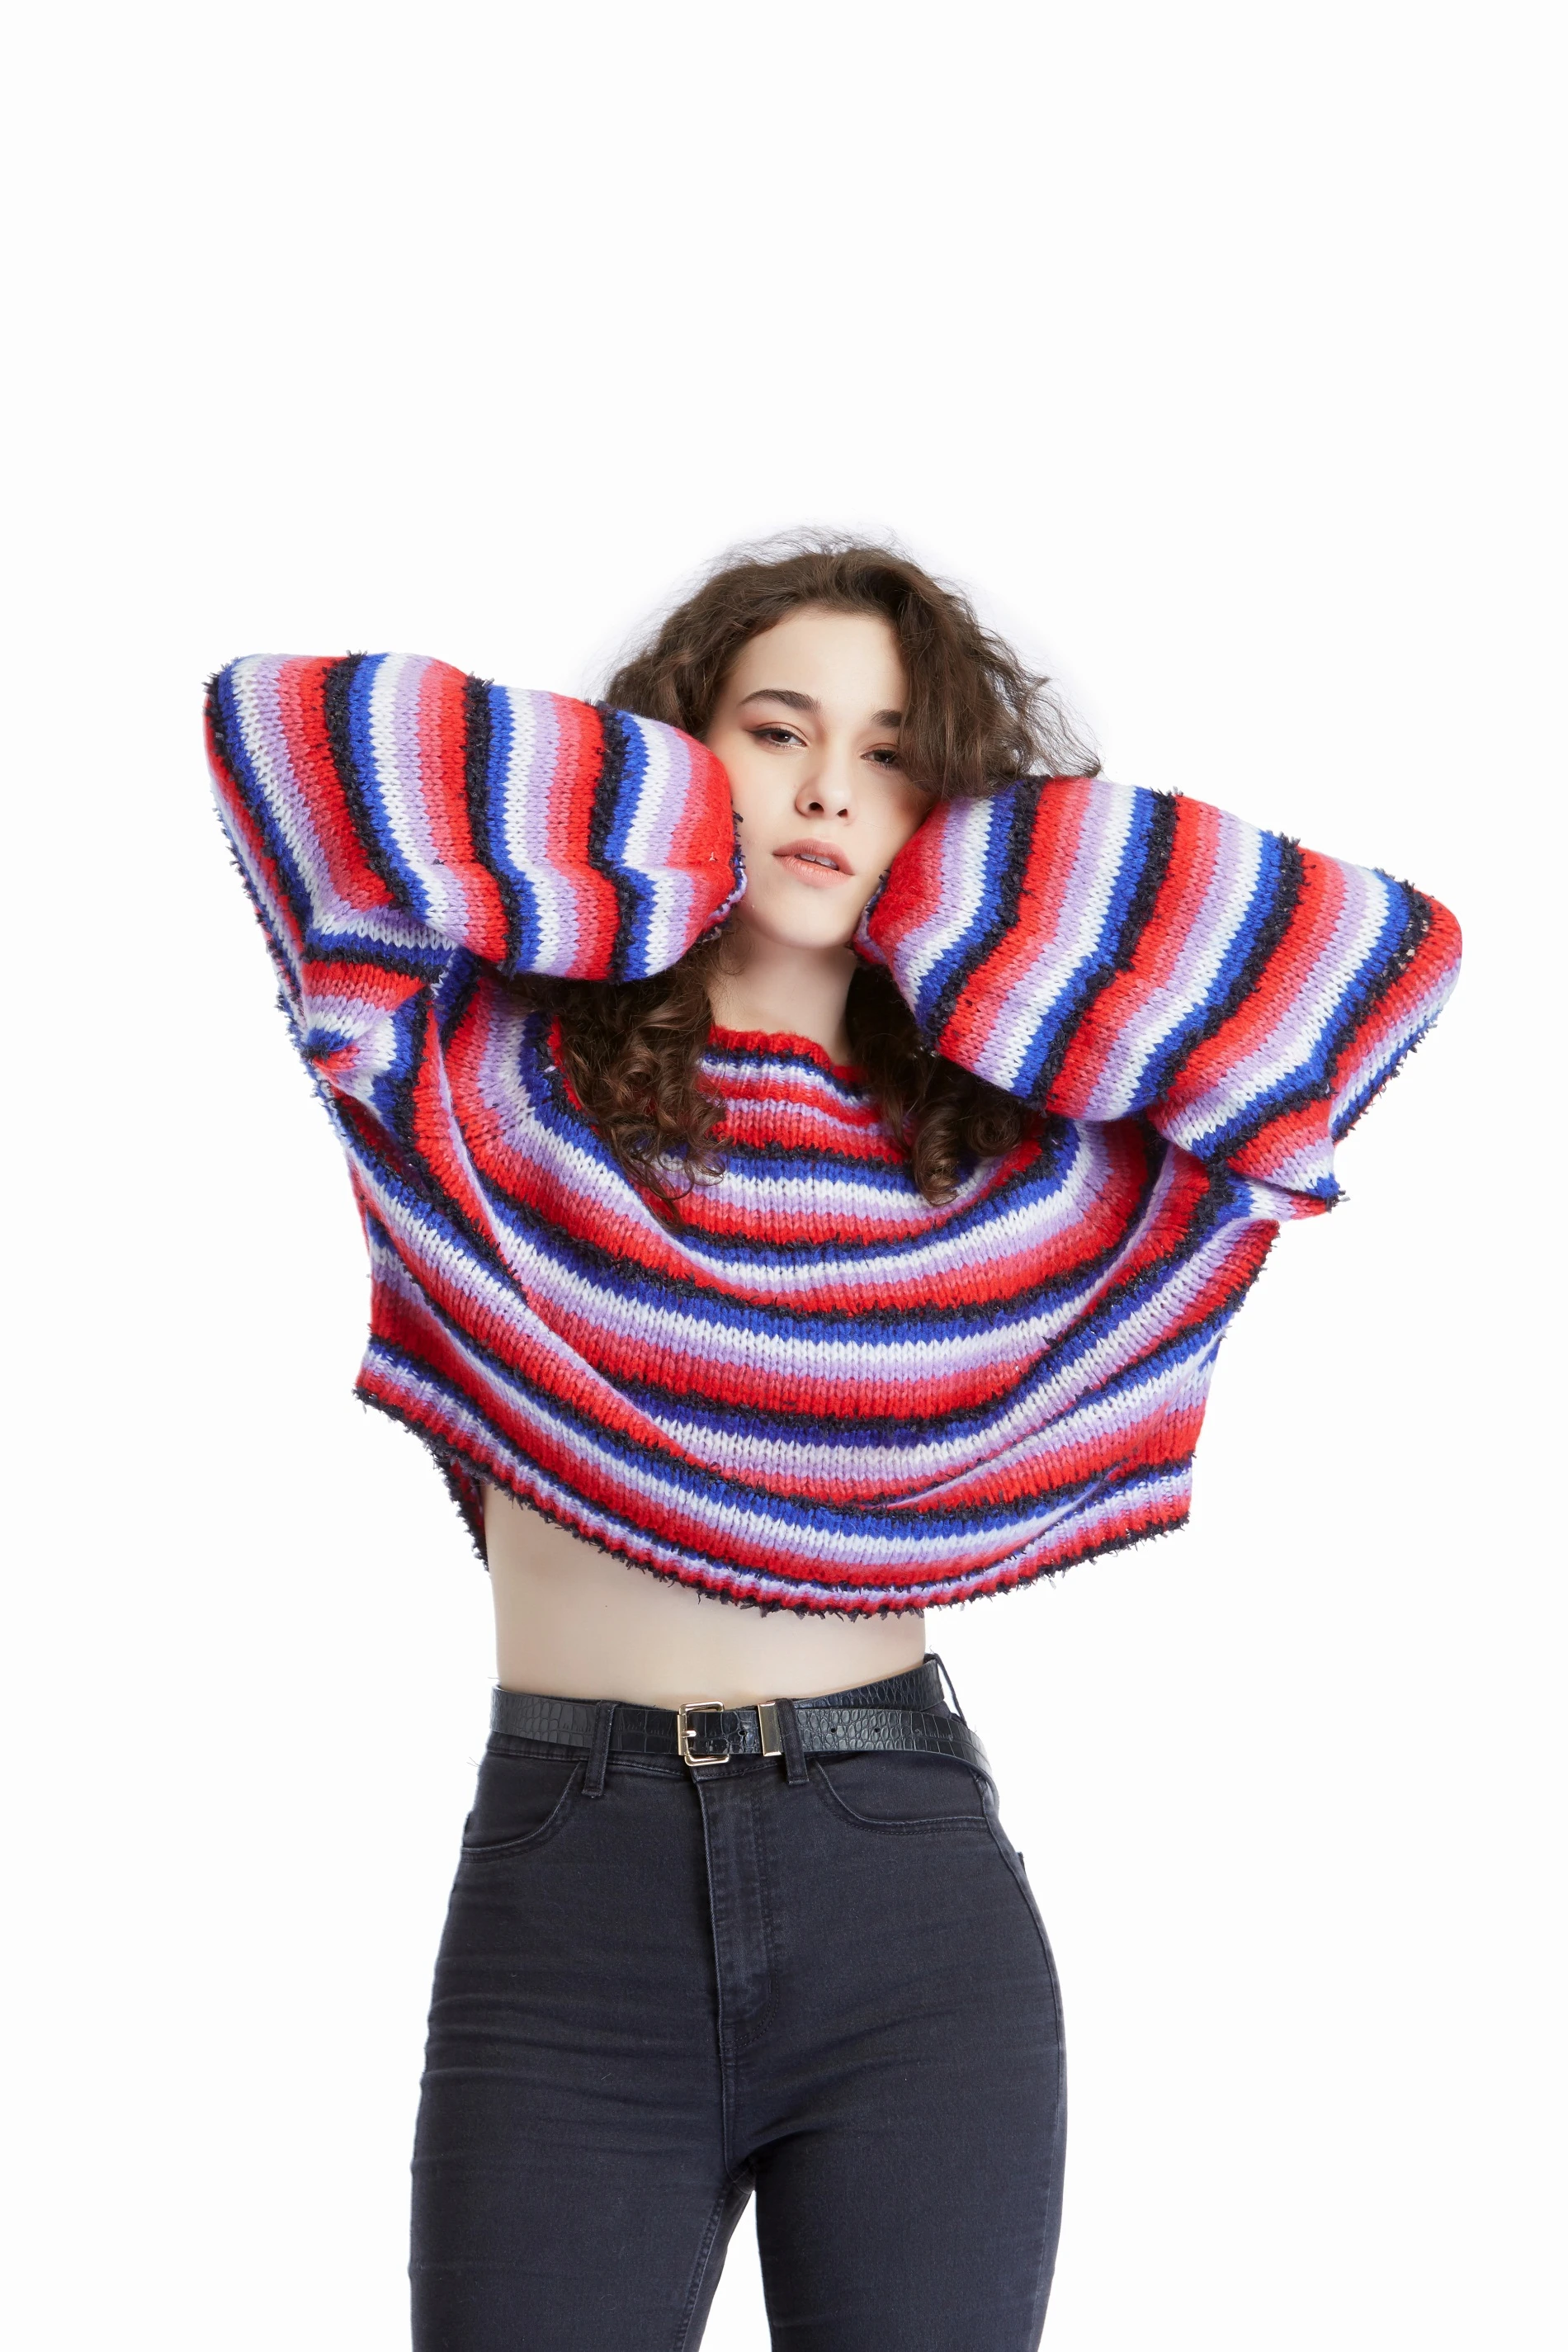 Autumn high fashion Rainbow striped sexy turtleneck knitted women jumper Casual long sleeve sweater pullover boutique clothes